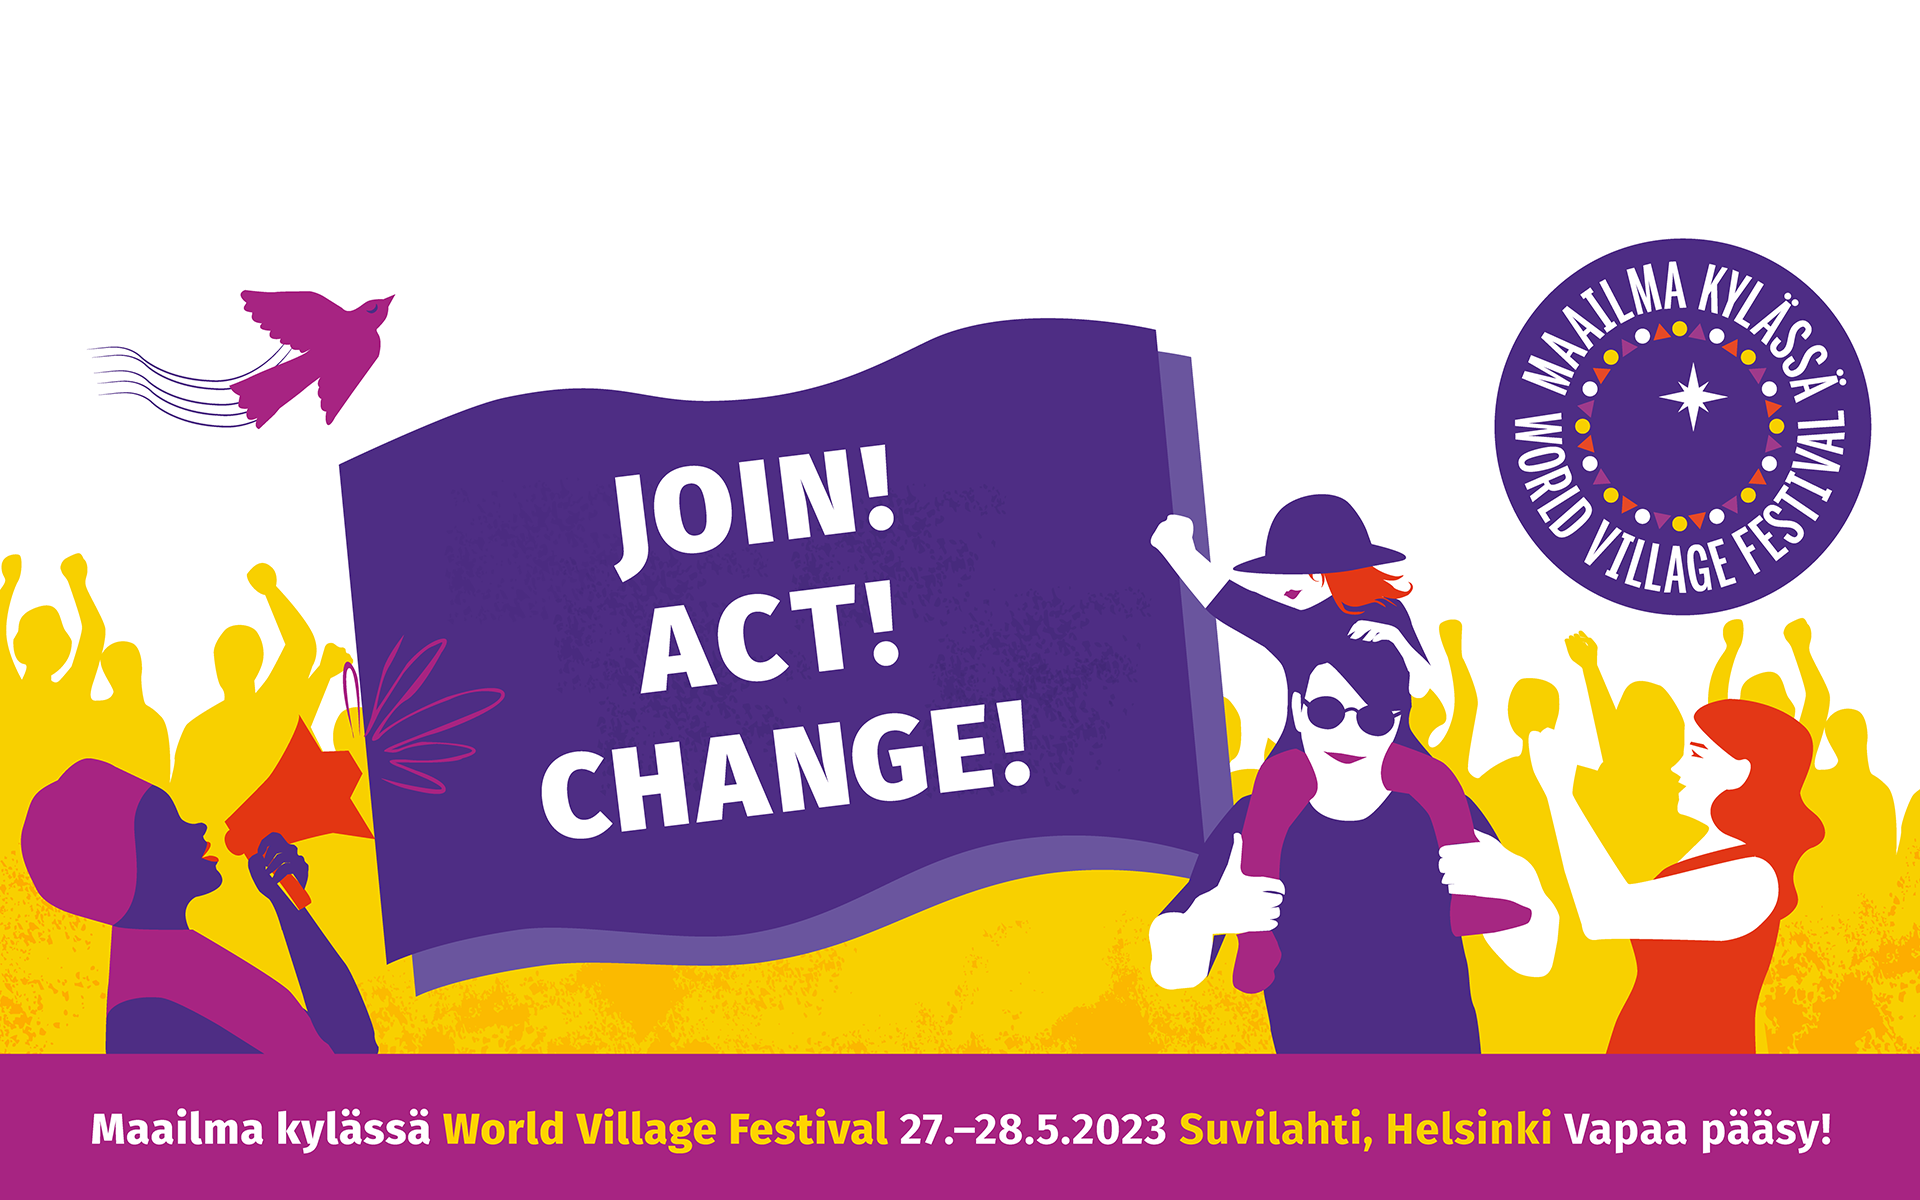 World Village festival ad banner with text Join! Act! Change!